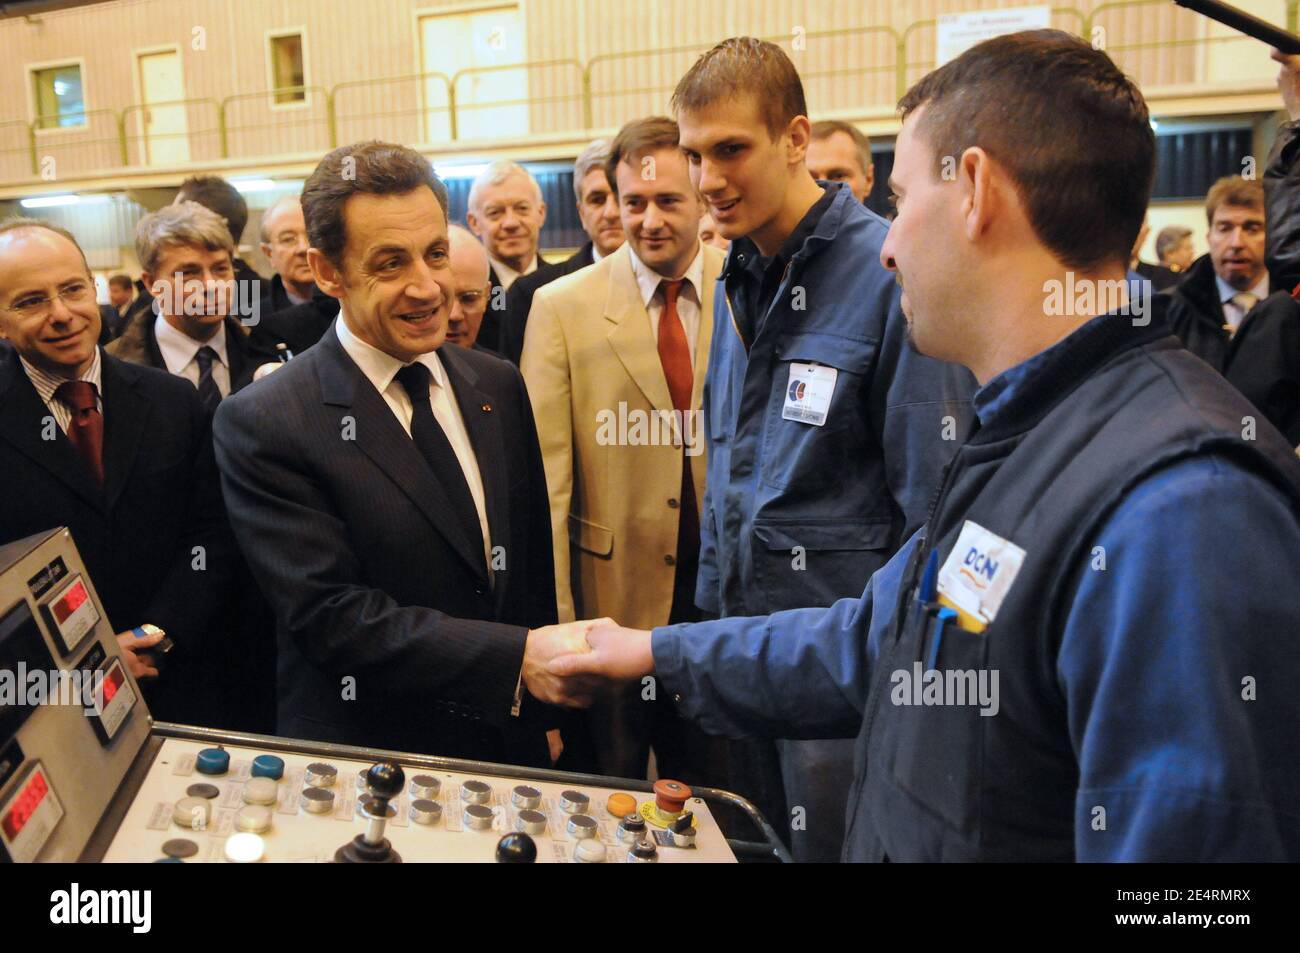 "Jean-Marie Poimboeuf and French President Nicolas Sarkozy talk with workers of French shipbuilder DCNS where the nuclear submarine 'le Terrible' was built in Cherbourg, western France March 21, 2008. President Sarkozy visited France's new generation nuclear-armed submarine""Le Terrible"". Photo by Jacques Witt/Pool/ABACAPRESS.COM" Stock Photo